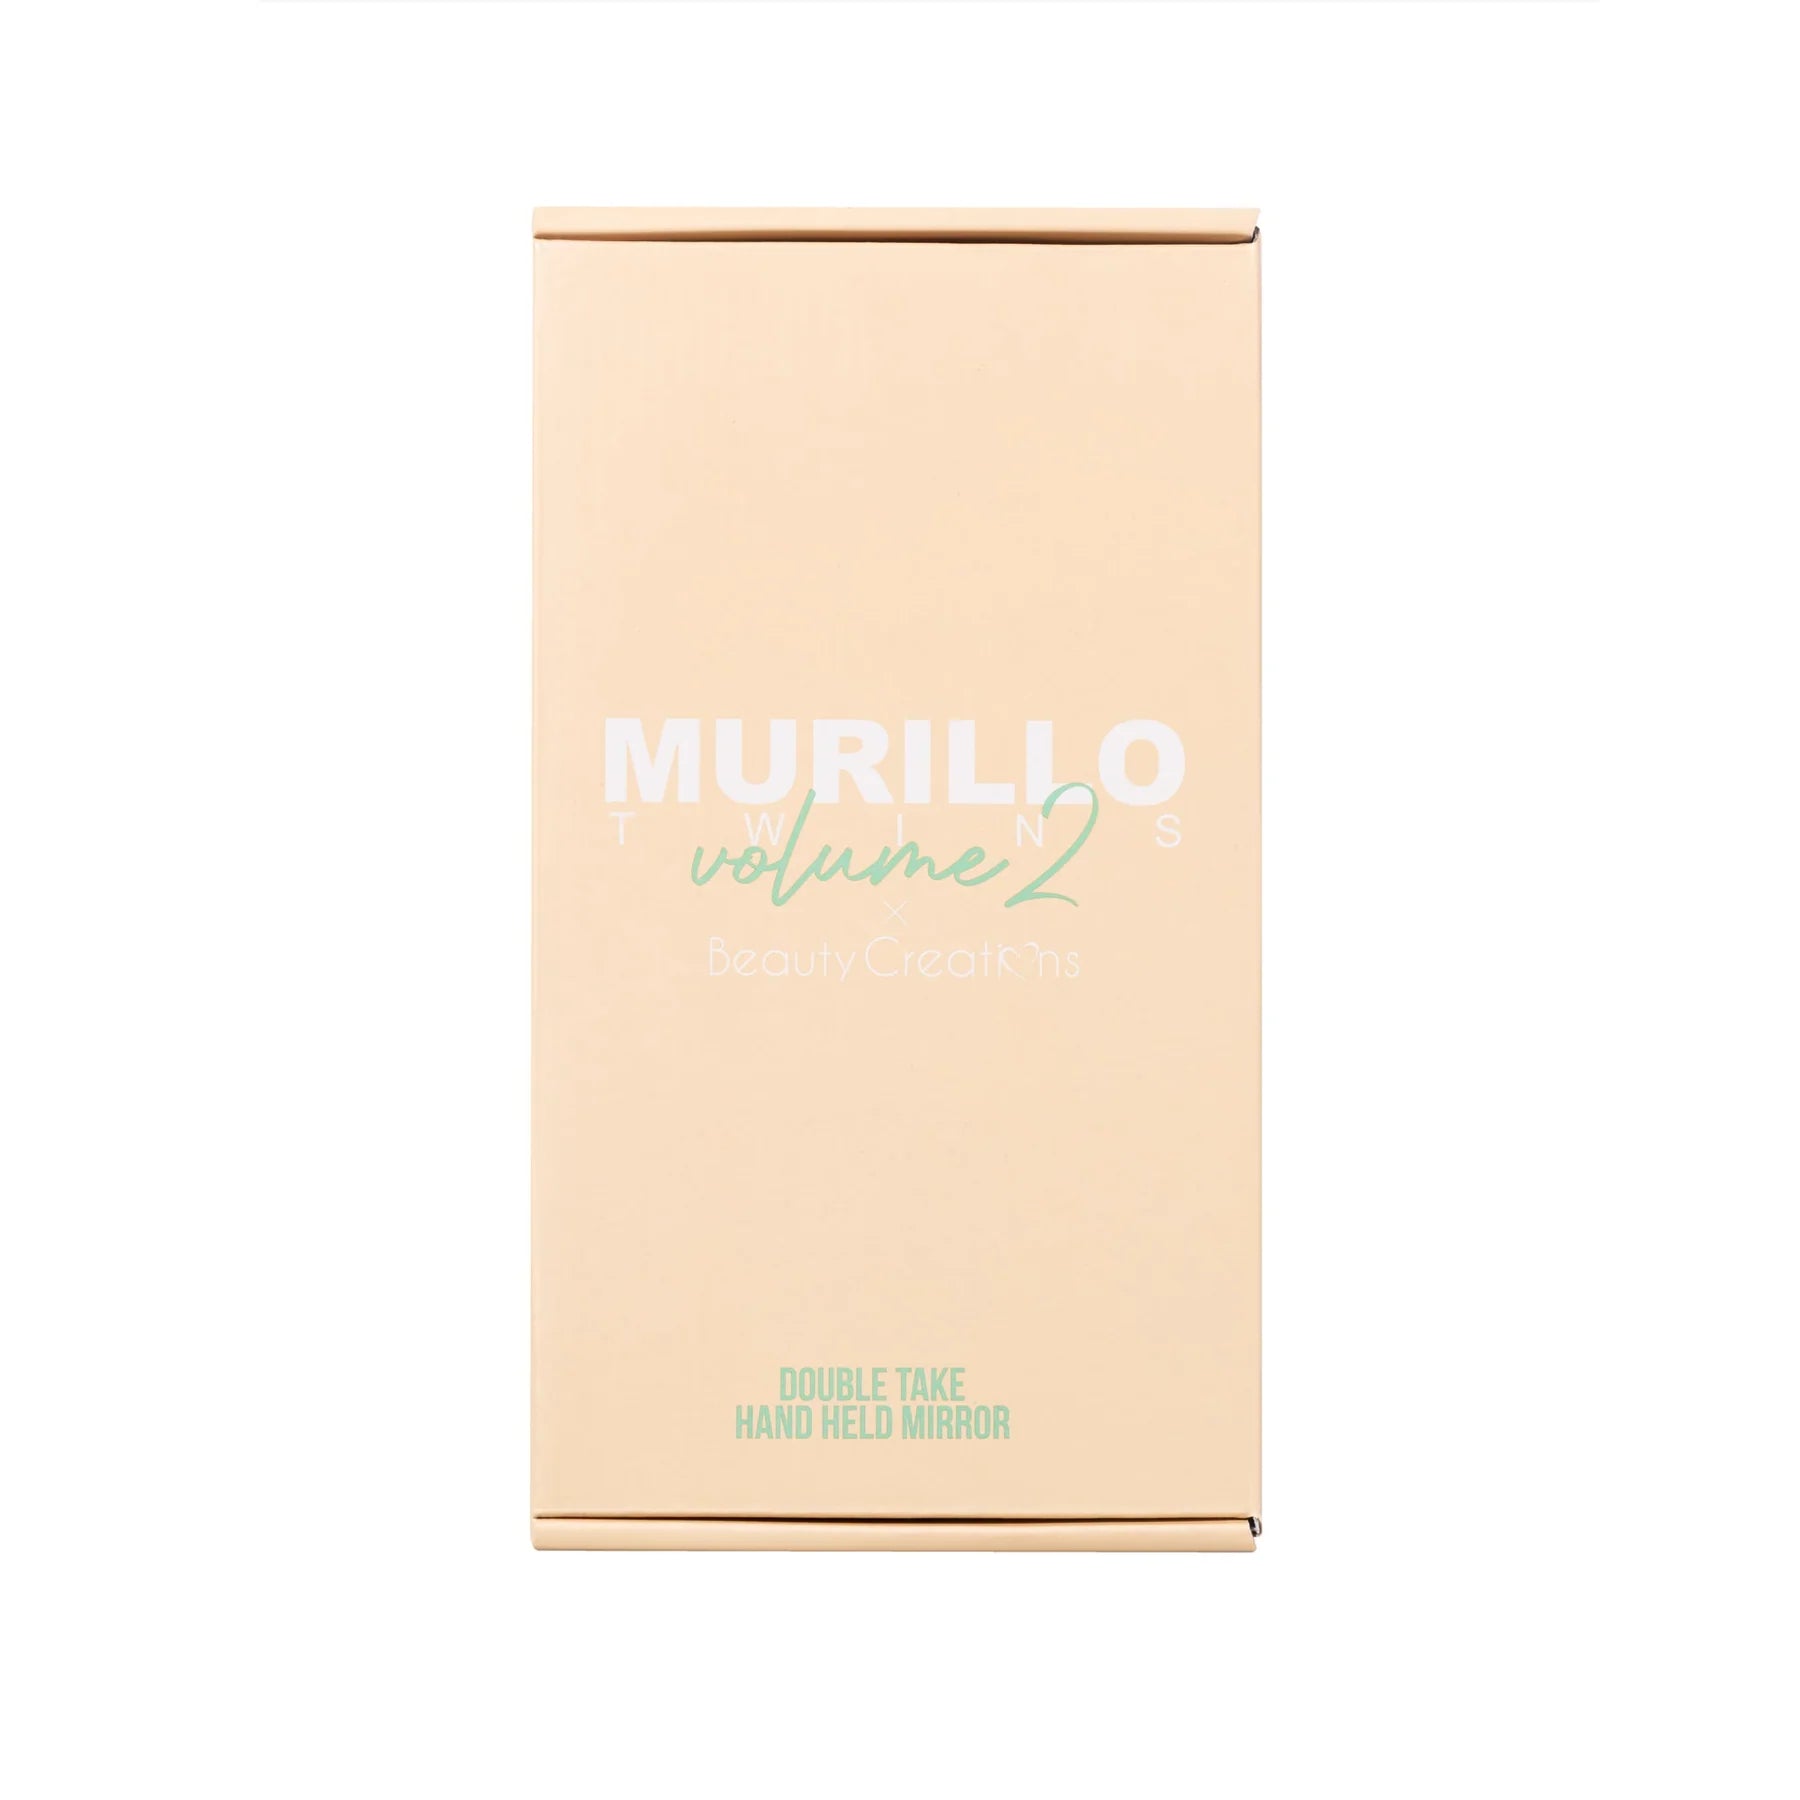 Beauty Creations - Murillo Twins Vol. 2 Double Take Hand Held Mirror